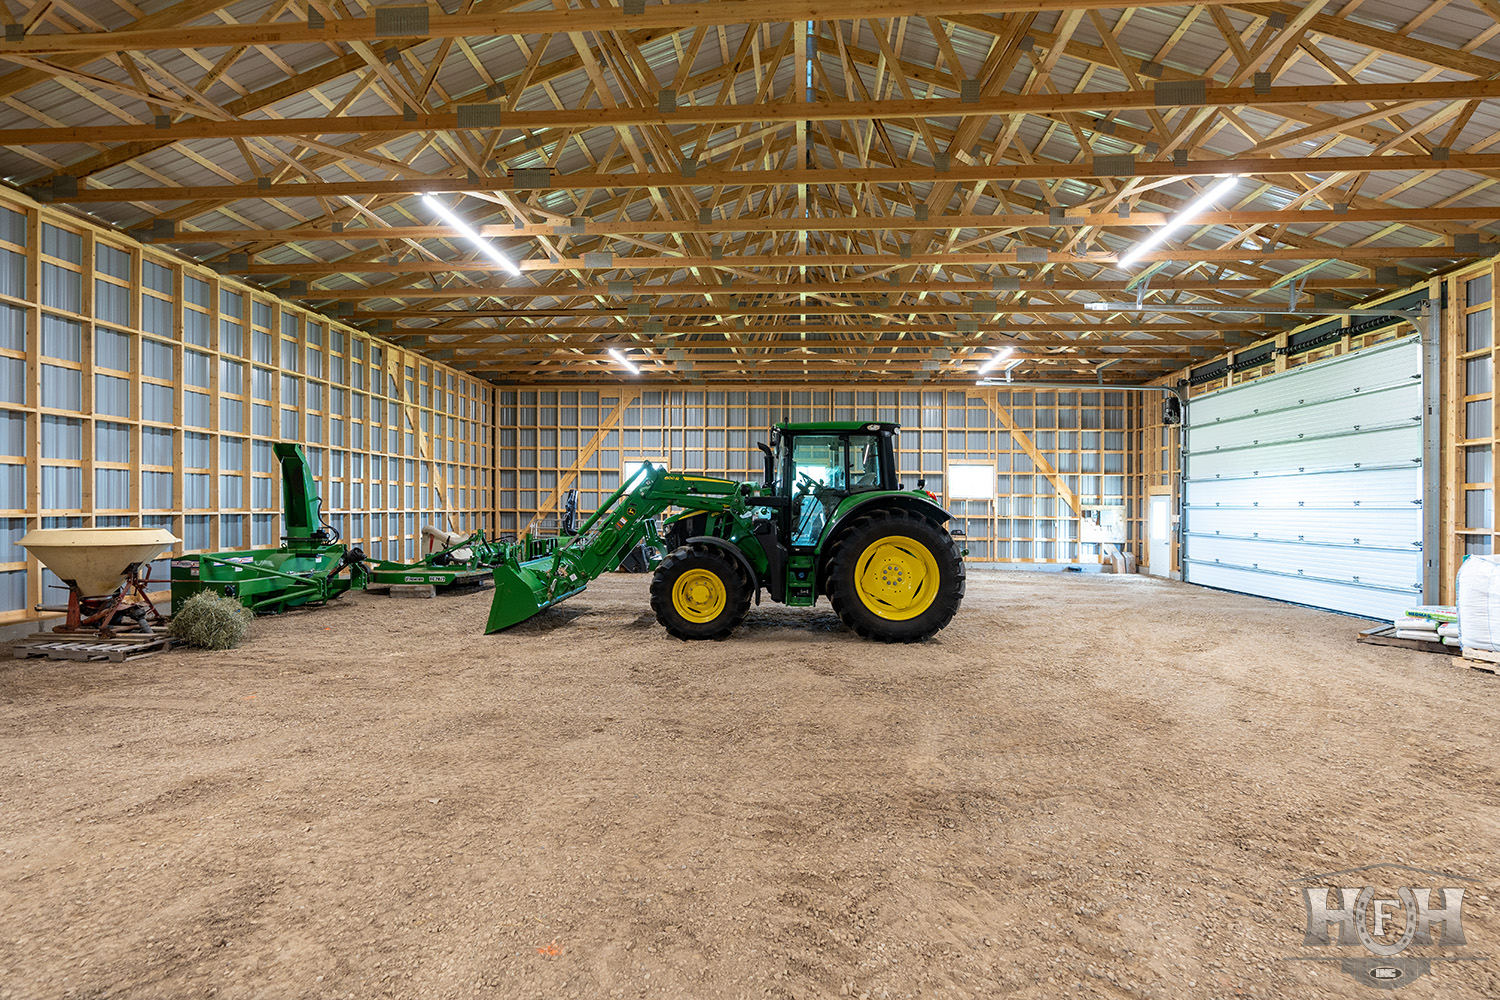 Interior of custom shop with large green tractor